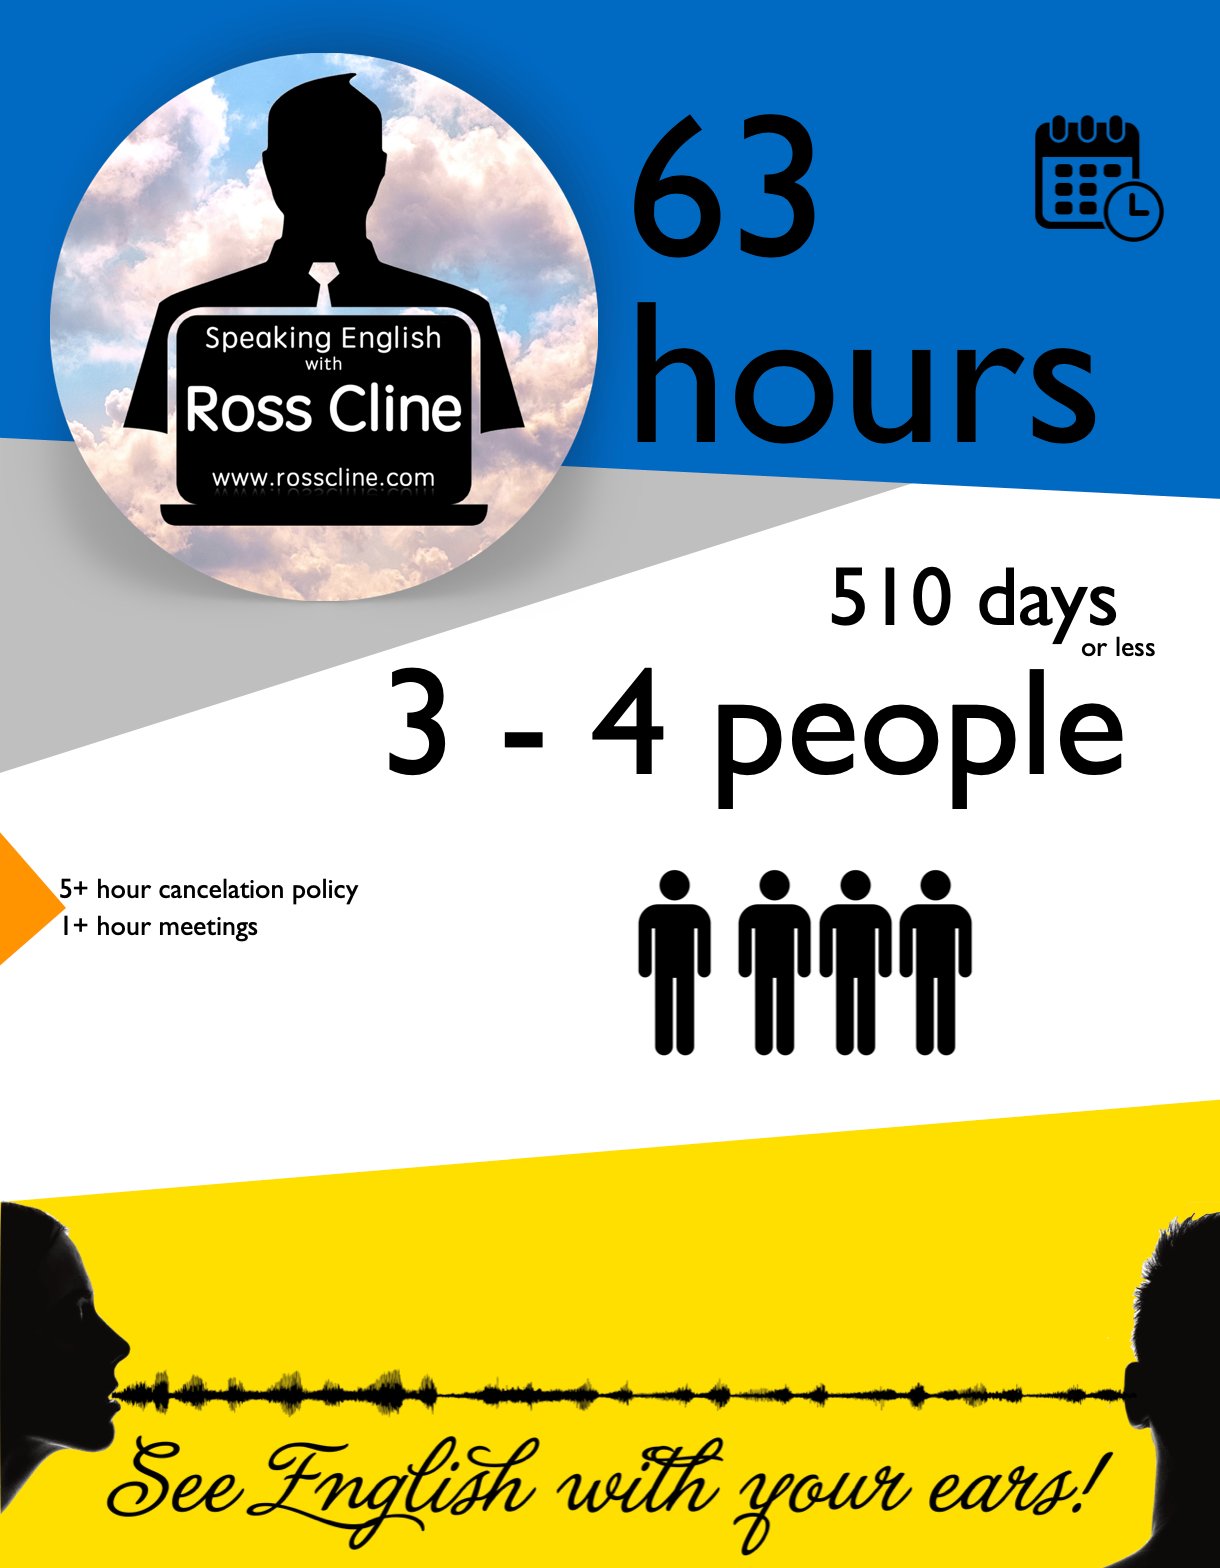 B.) 63 hours of Online Time for 3 - 4 people - www.rosscline.com